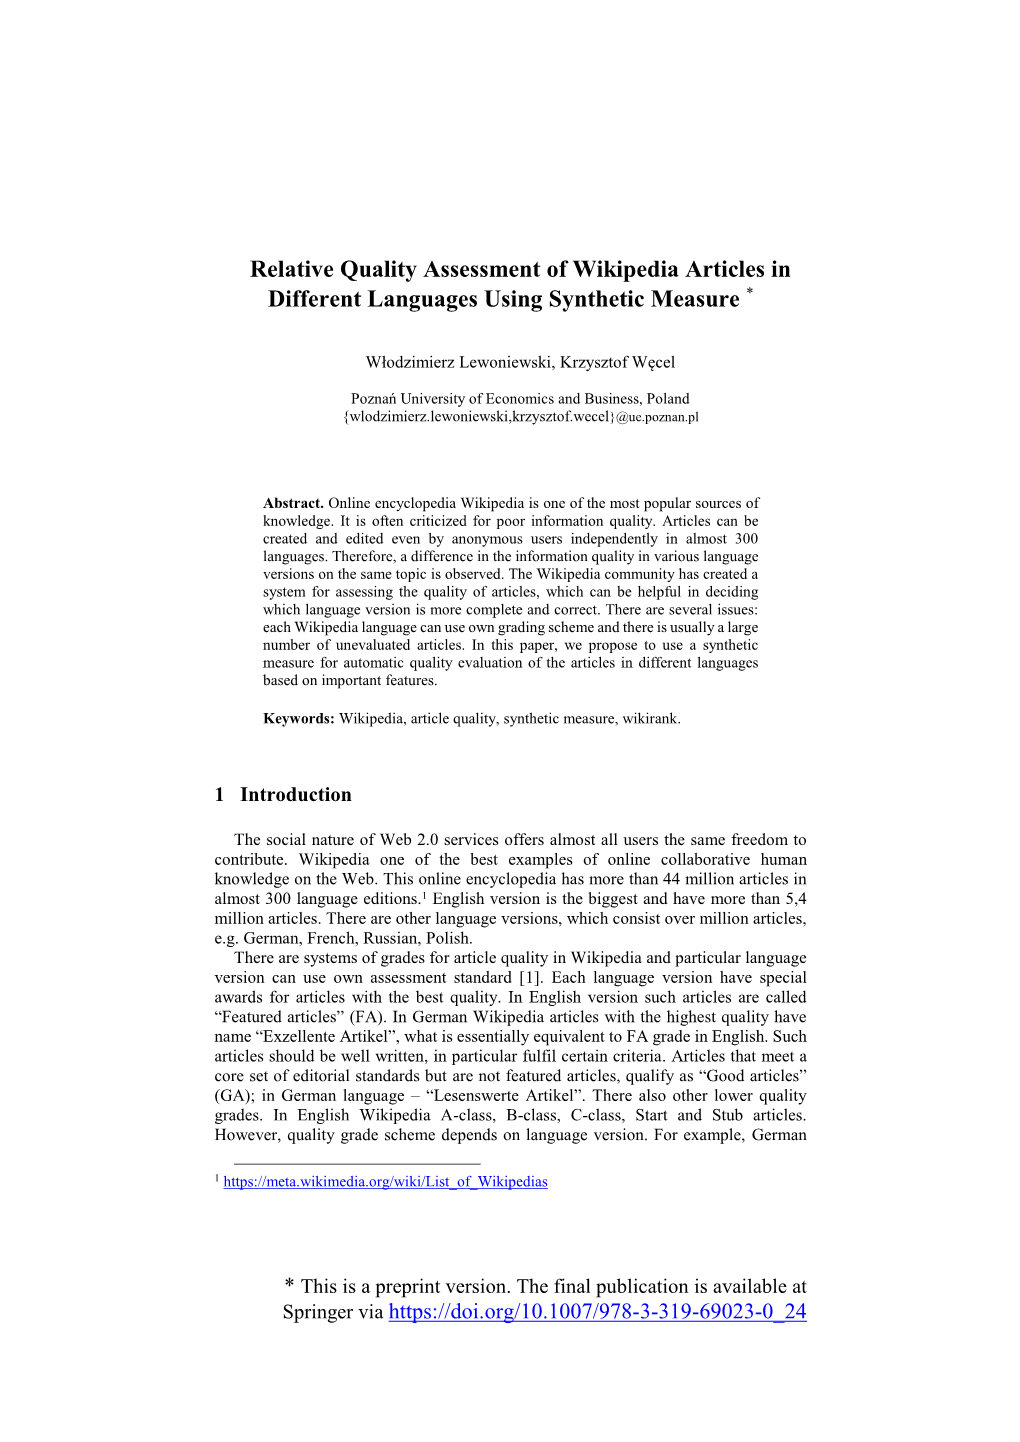 Relative Quality Assessment of Wikipedia Articles in Different Languages Using Synthetic Measure *